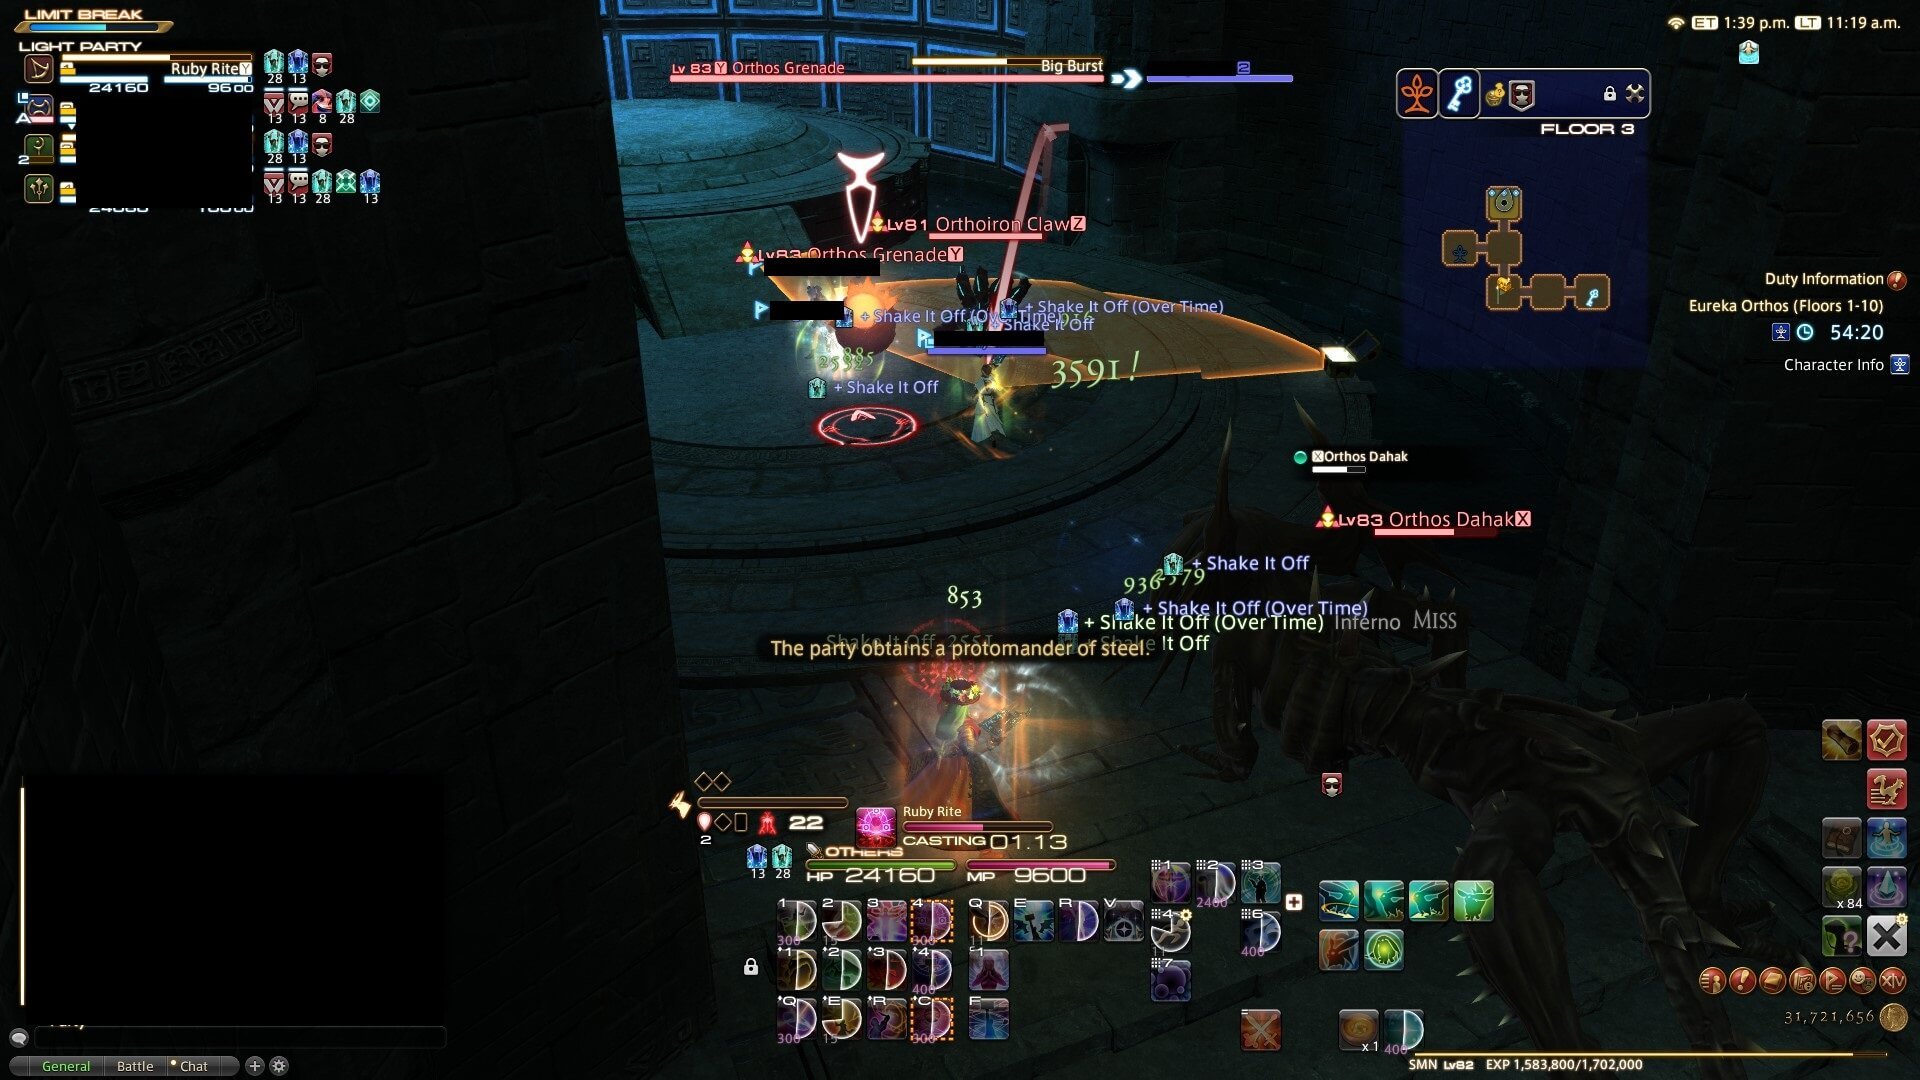 The party attacking an Orthos Grenade, Claw, and Dahak in Fantasy XIV Eureka Orthos.